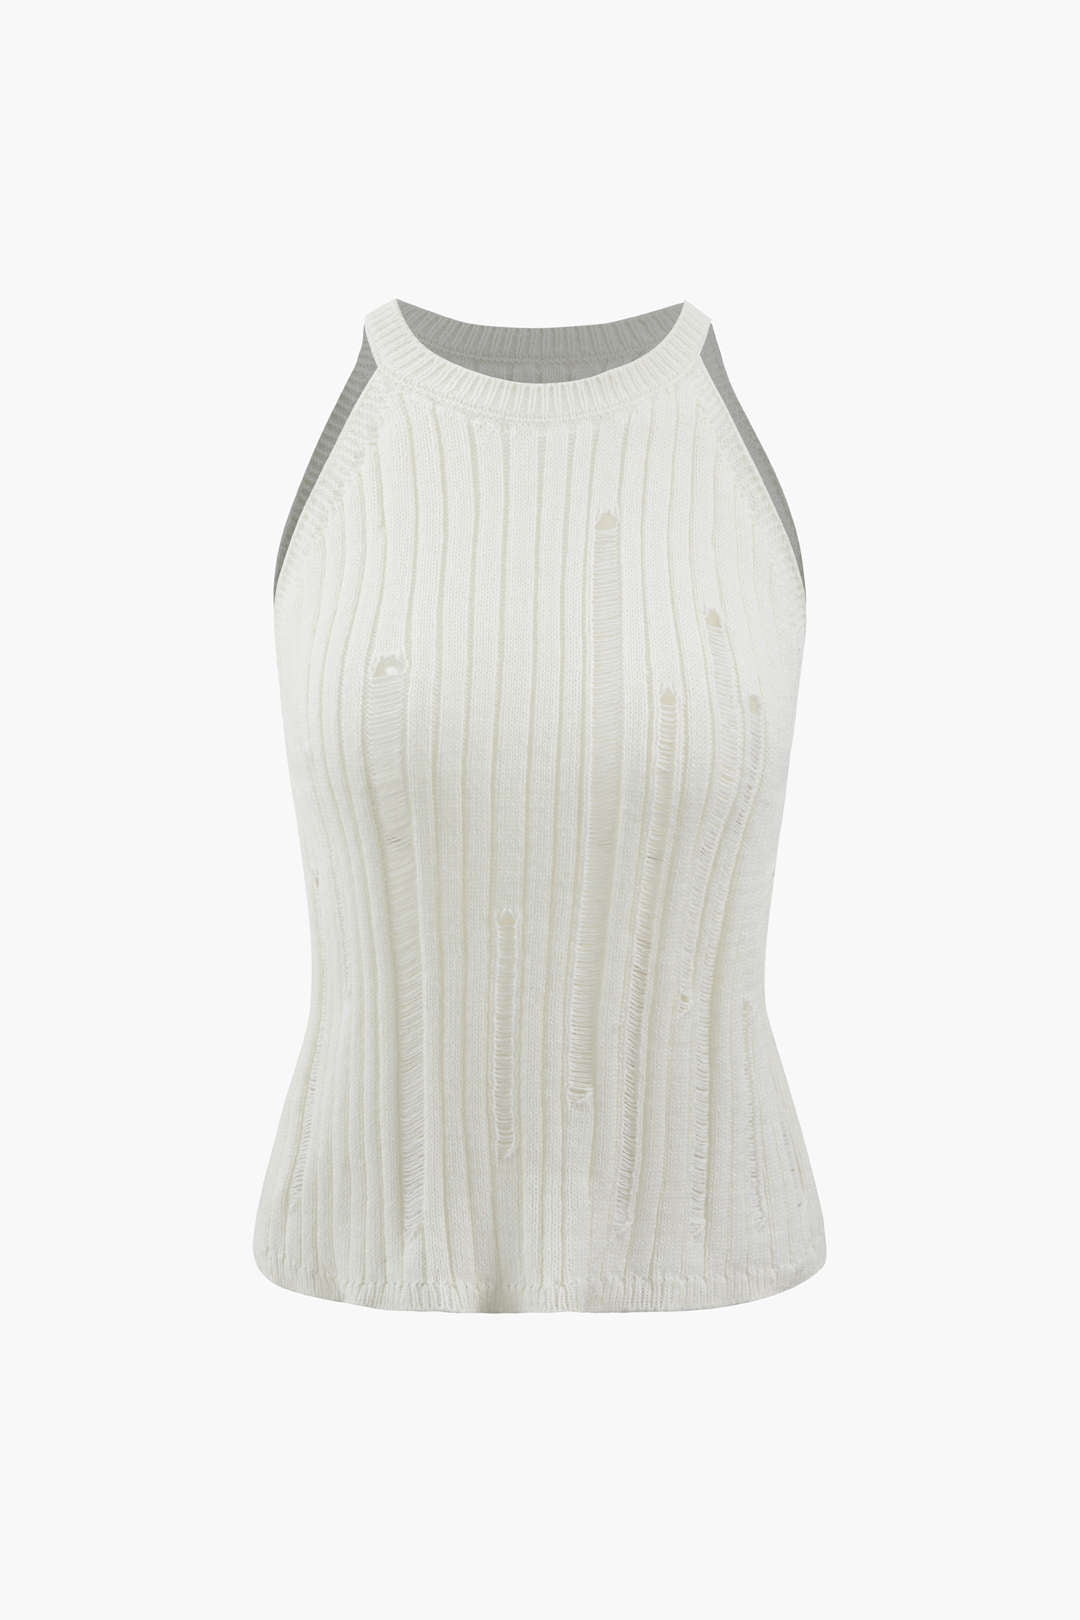 Distressed Laddered Knit Tank Top